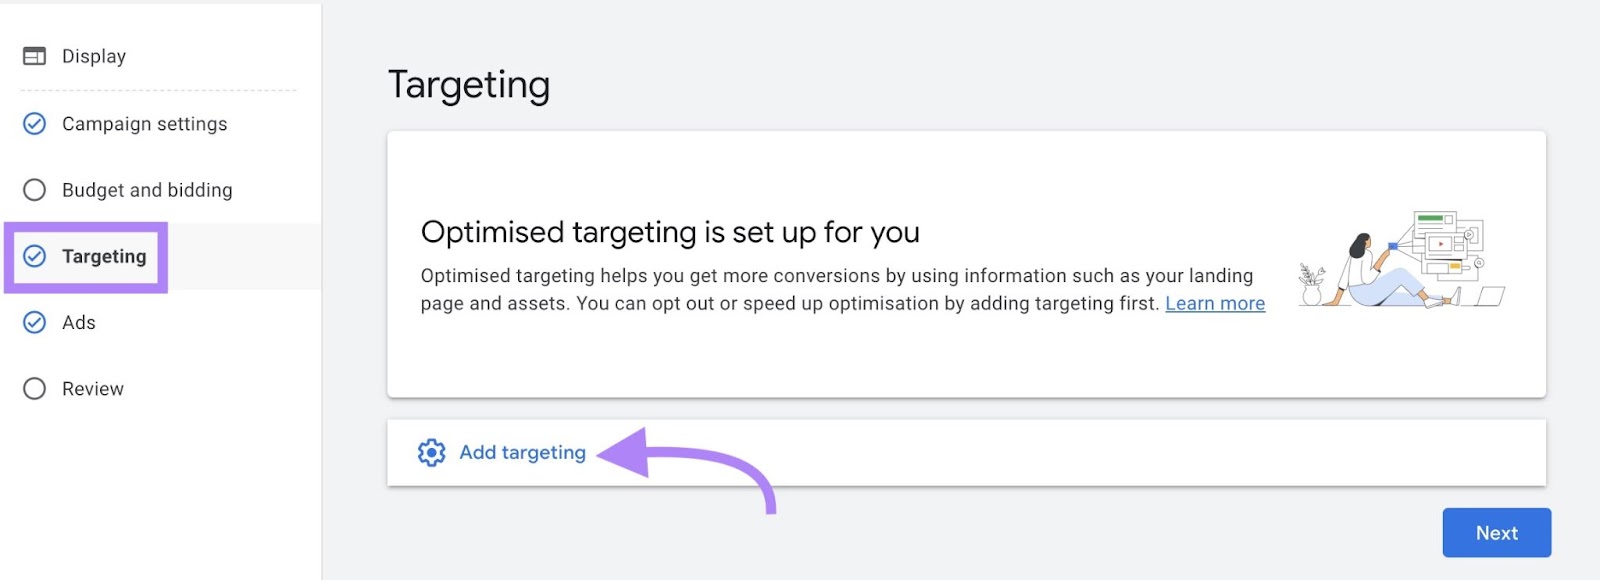 'Targeting' page of Campaign settings with an arrow pointing to 'Add targeting'